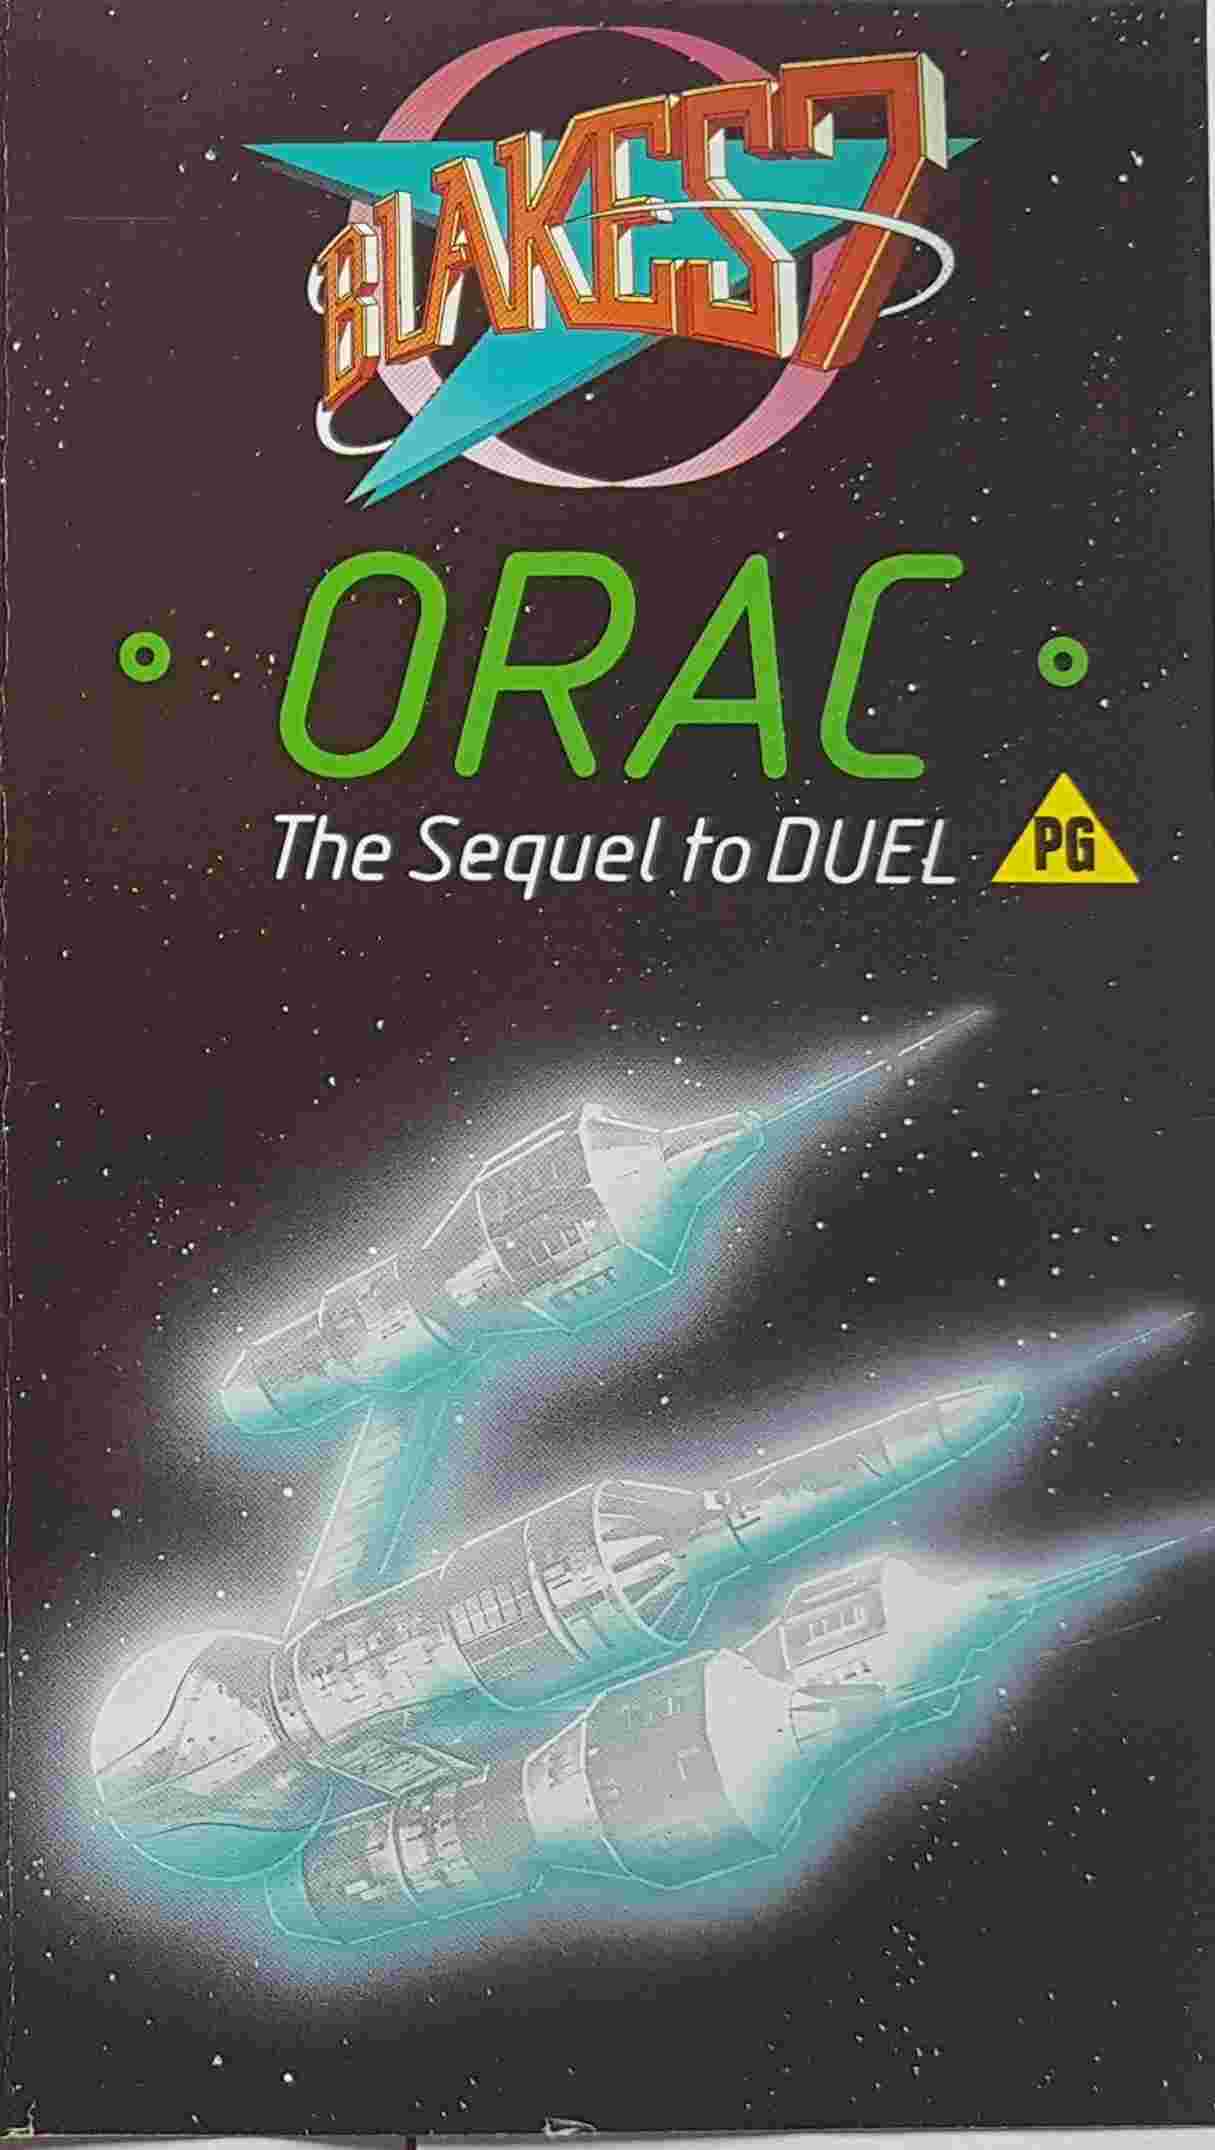 Picture of BBCV 2037 Blake's 7 - Orac (Edited) by artist Unknown from the BBC videos - Records and Tapes library